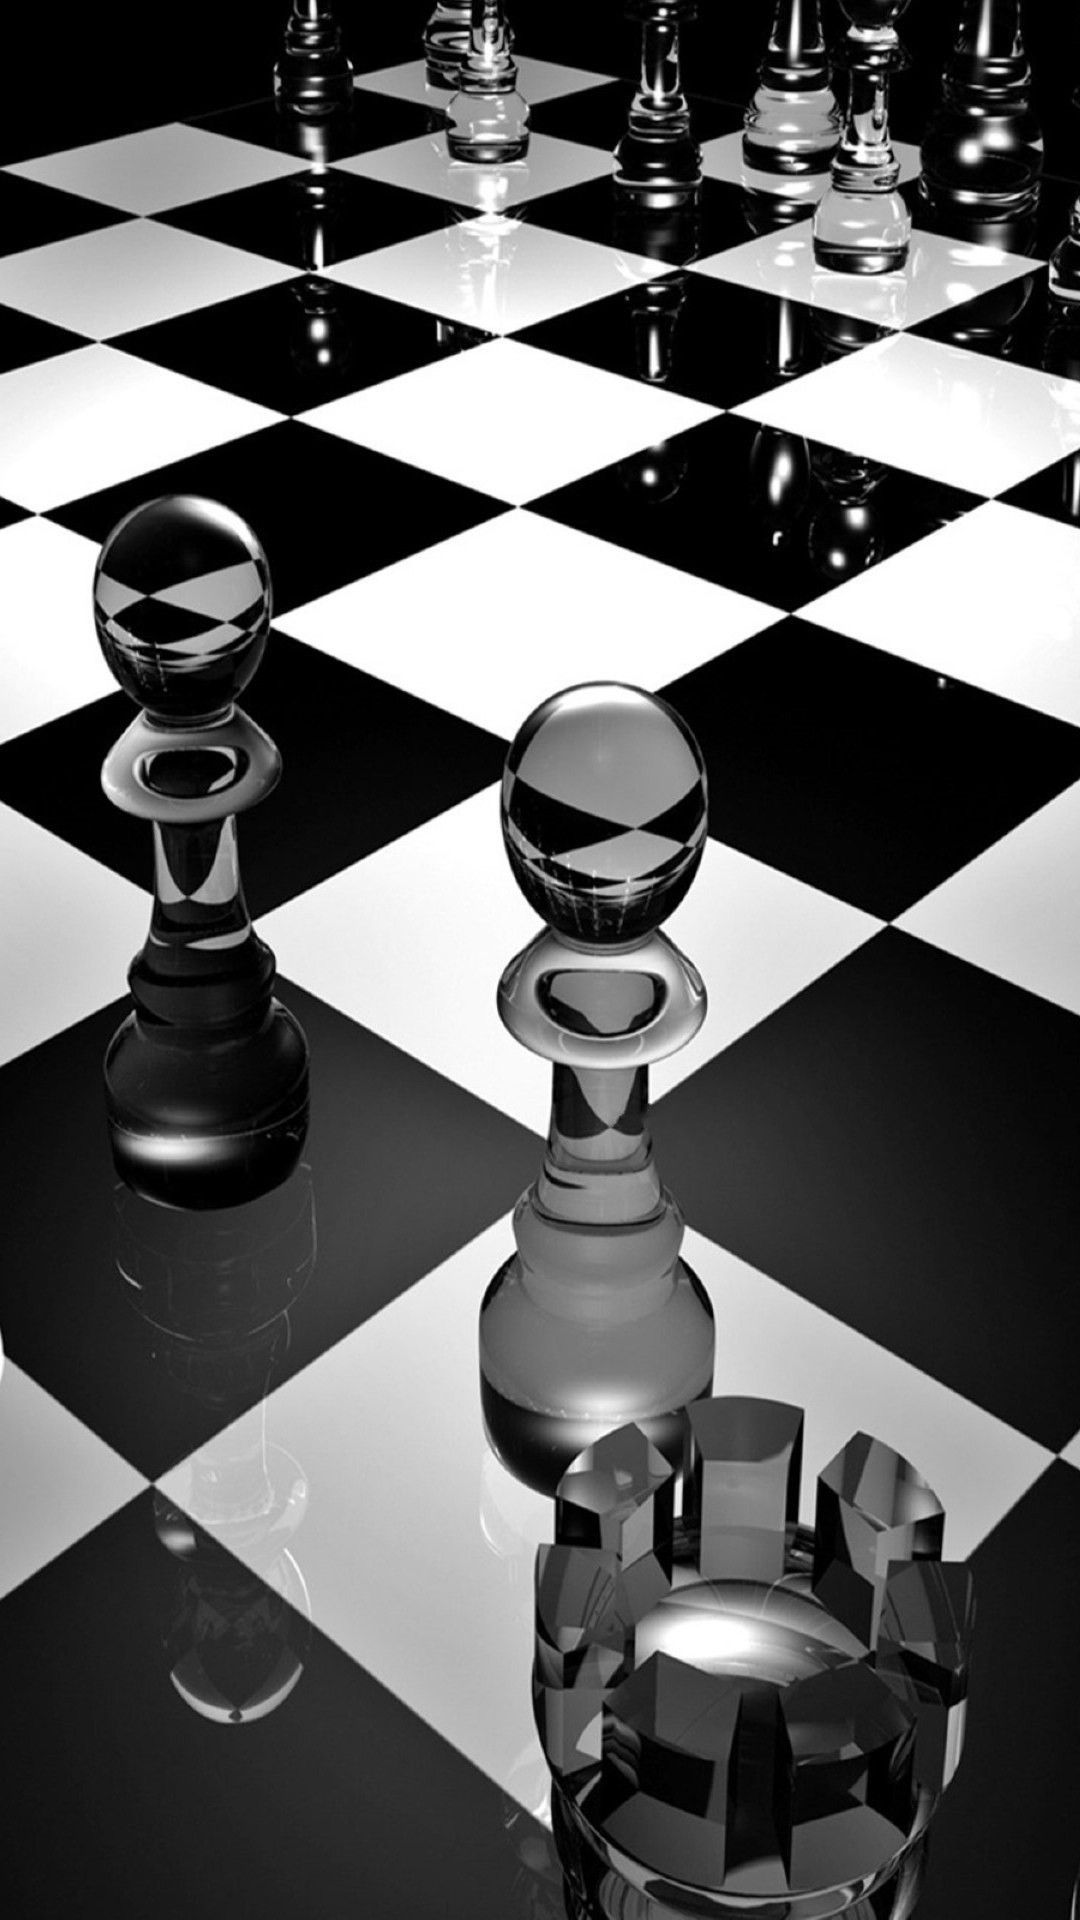 Cool 3D Wallpaper For iPhone 6. Chess pieces, Chess and Wallpaperd wallpaper iphone, Glass chess, Chess board